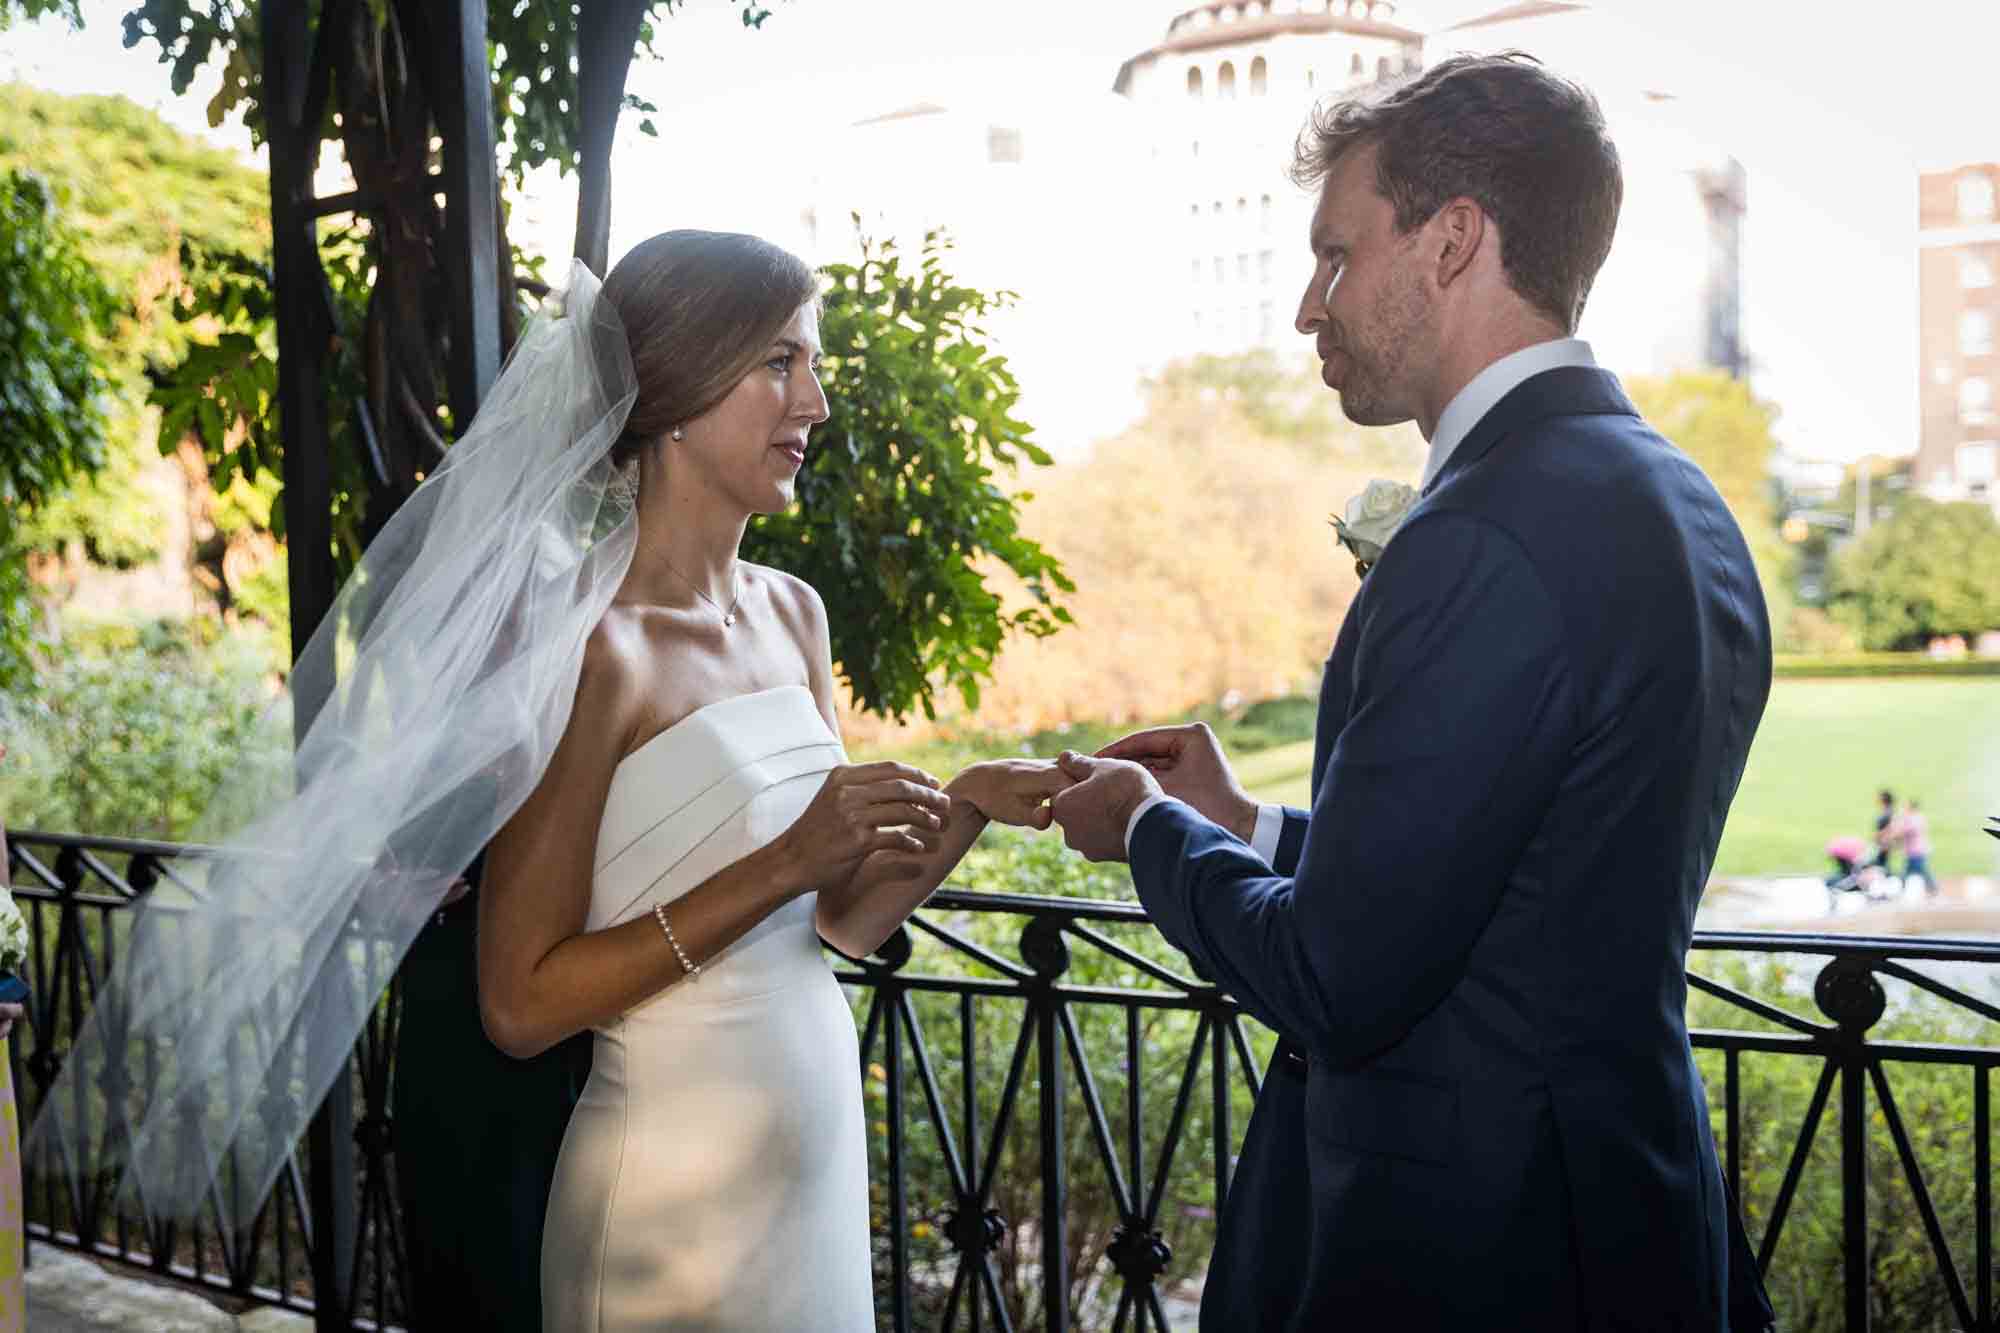 Bride and groom exchanging rings during a Conservatory Garden wedding in Central Park